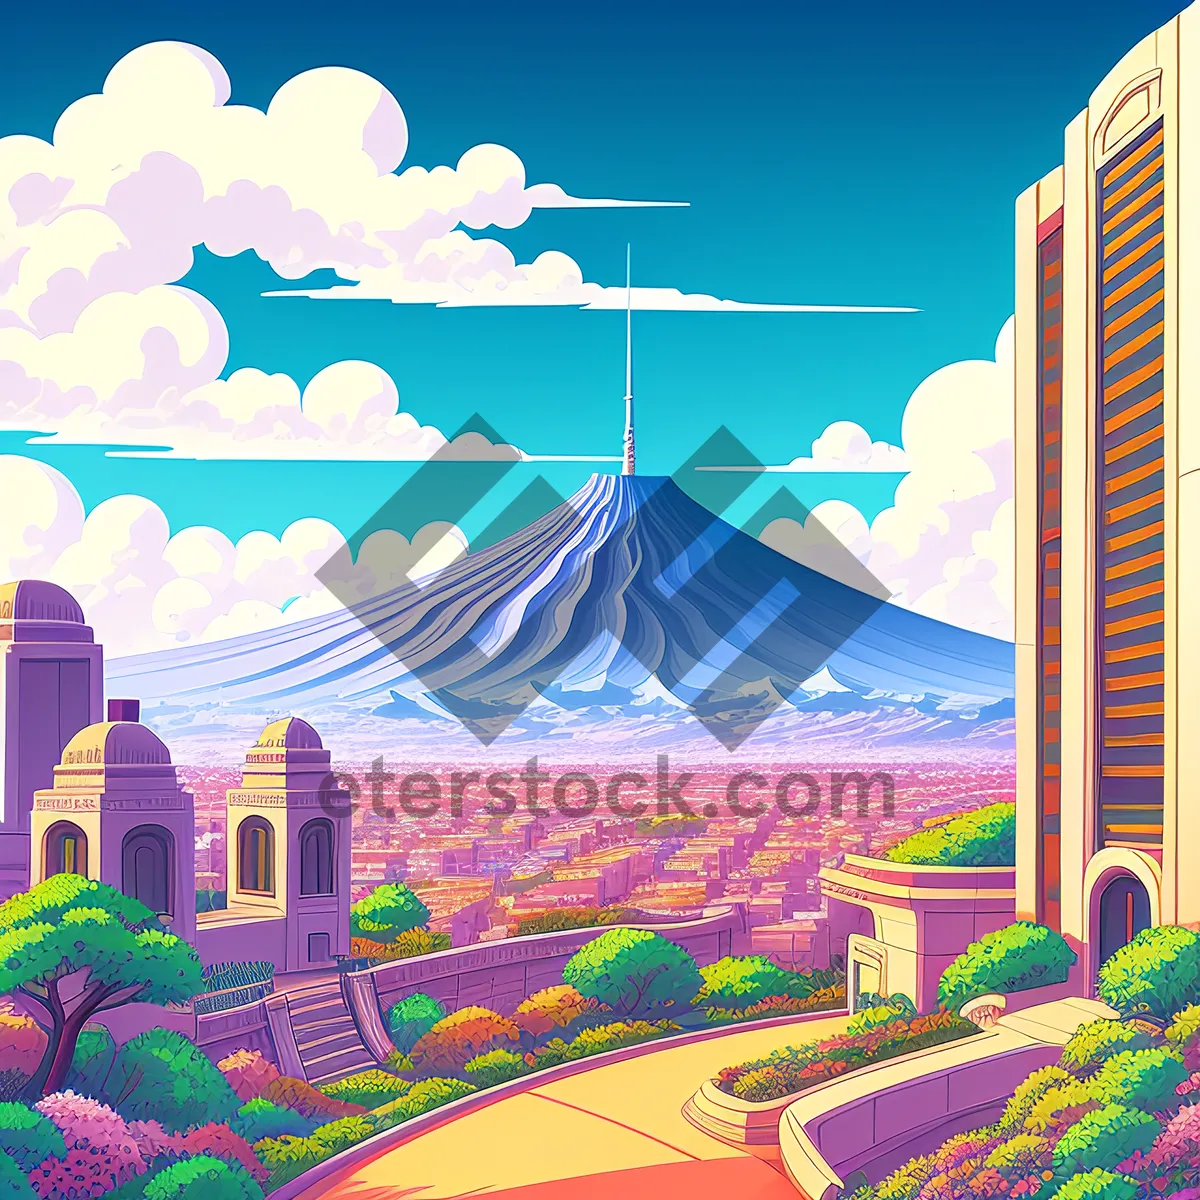 Picture of City-inspired Artwork with Stunning Pyramid Design